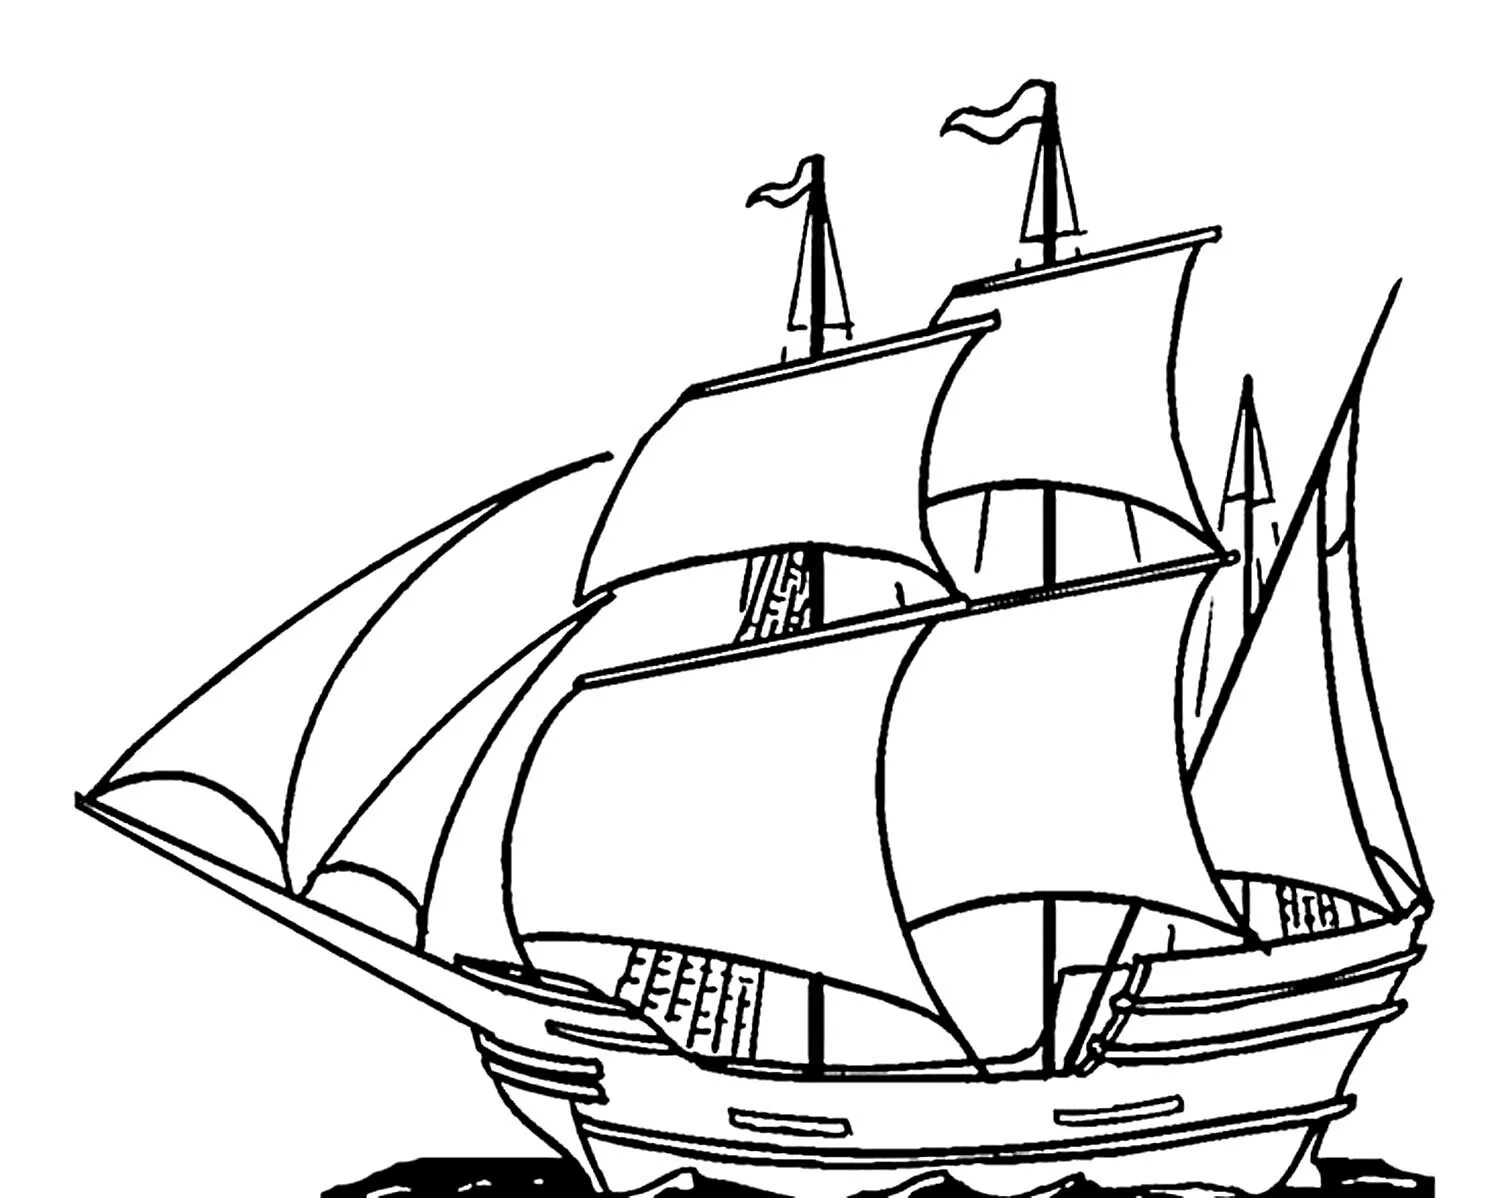 Colorfully painted scarlet sails Grade 6 coloring book